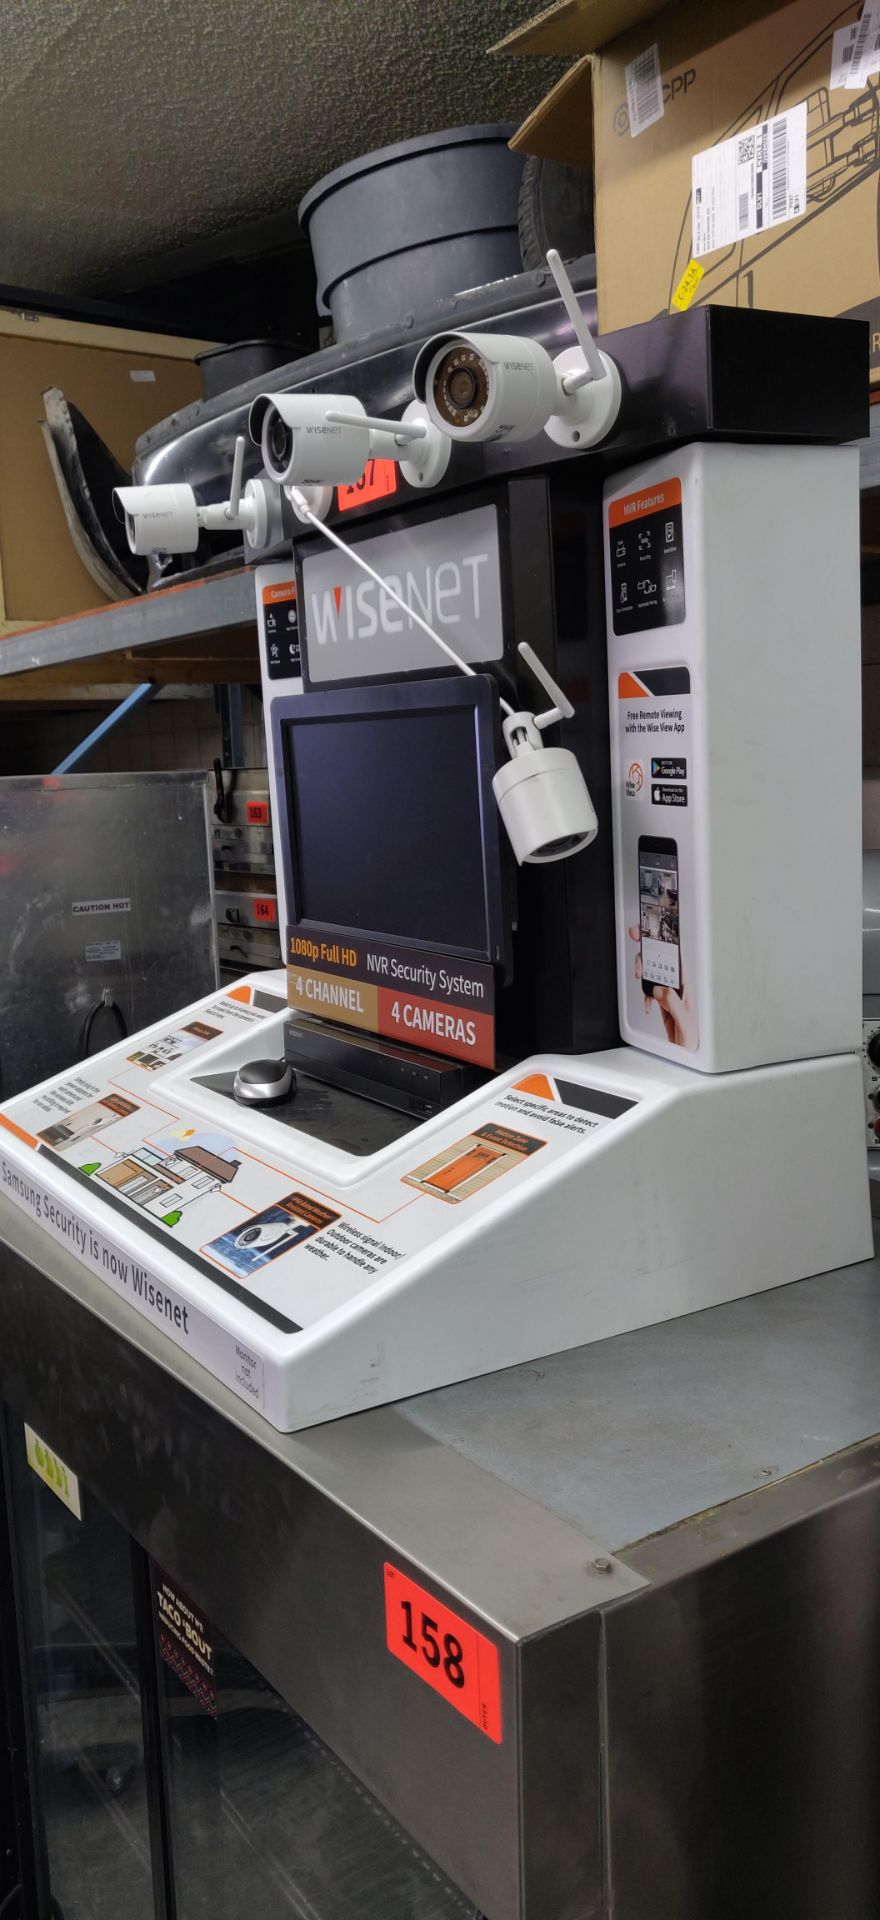 WISENET NVR SECURITY SYSTEM STORE DISPLAY UNIT - Image 2 of 3